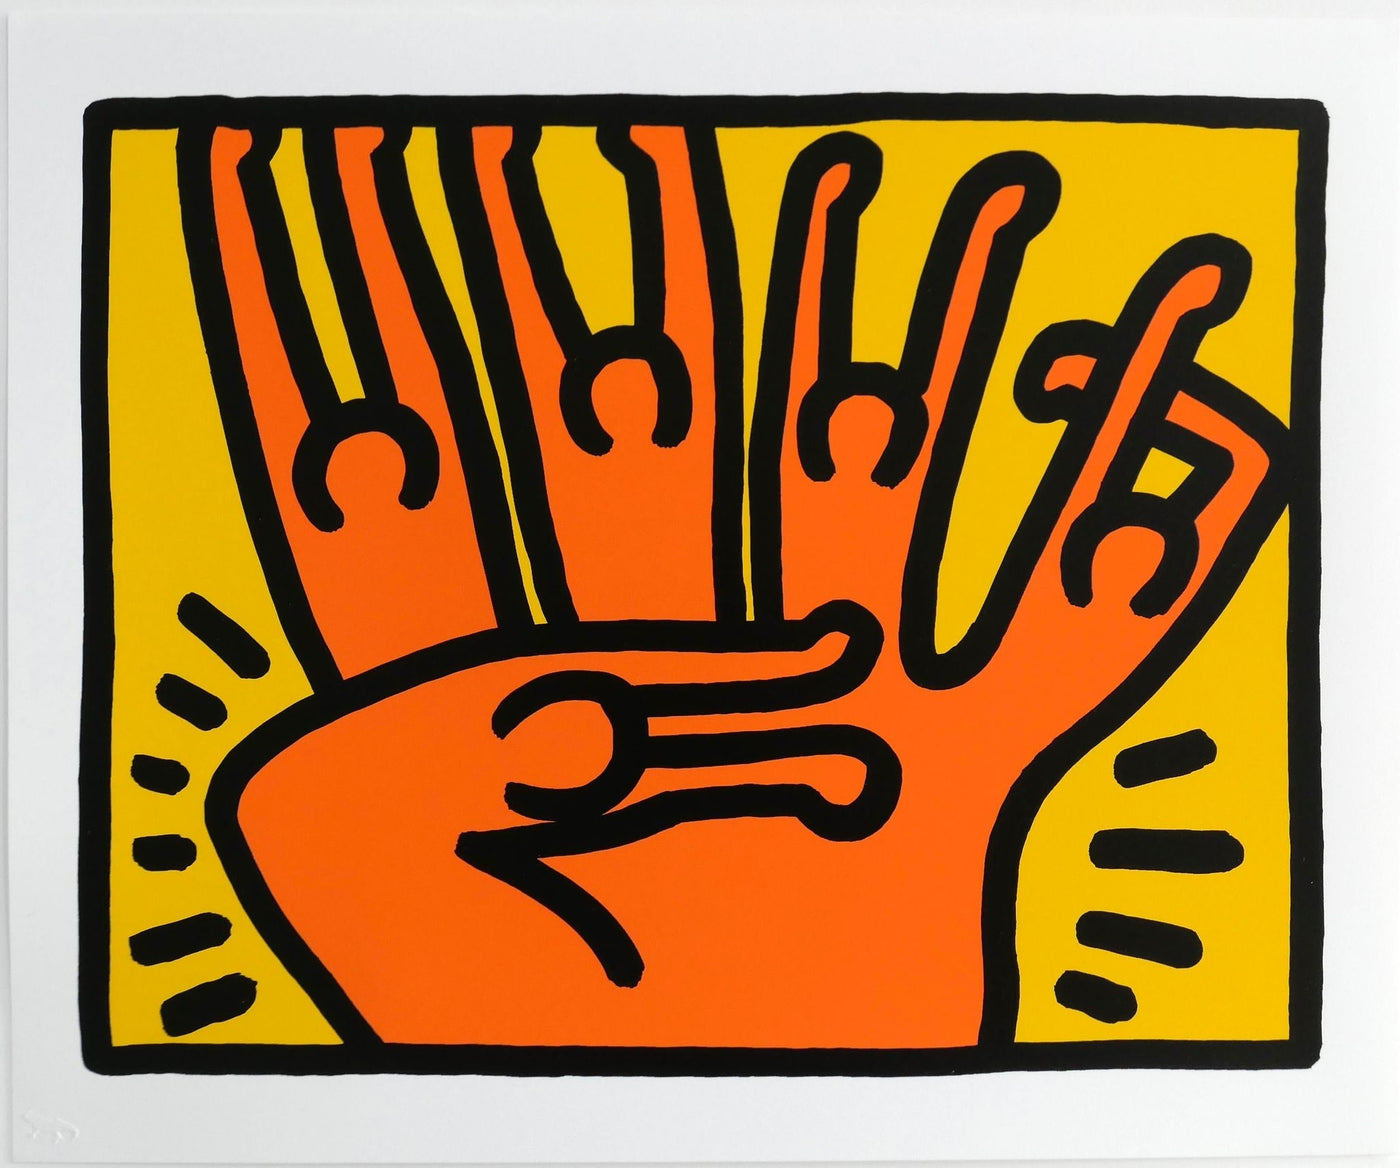 Keith Haring Pop Shop VI Plate 3 (L. PP. 150-51) 1989